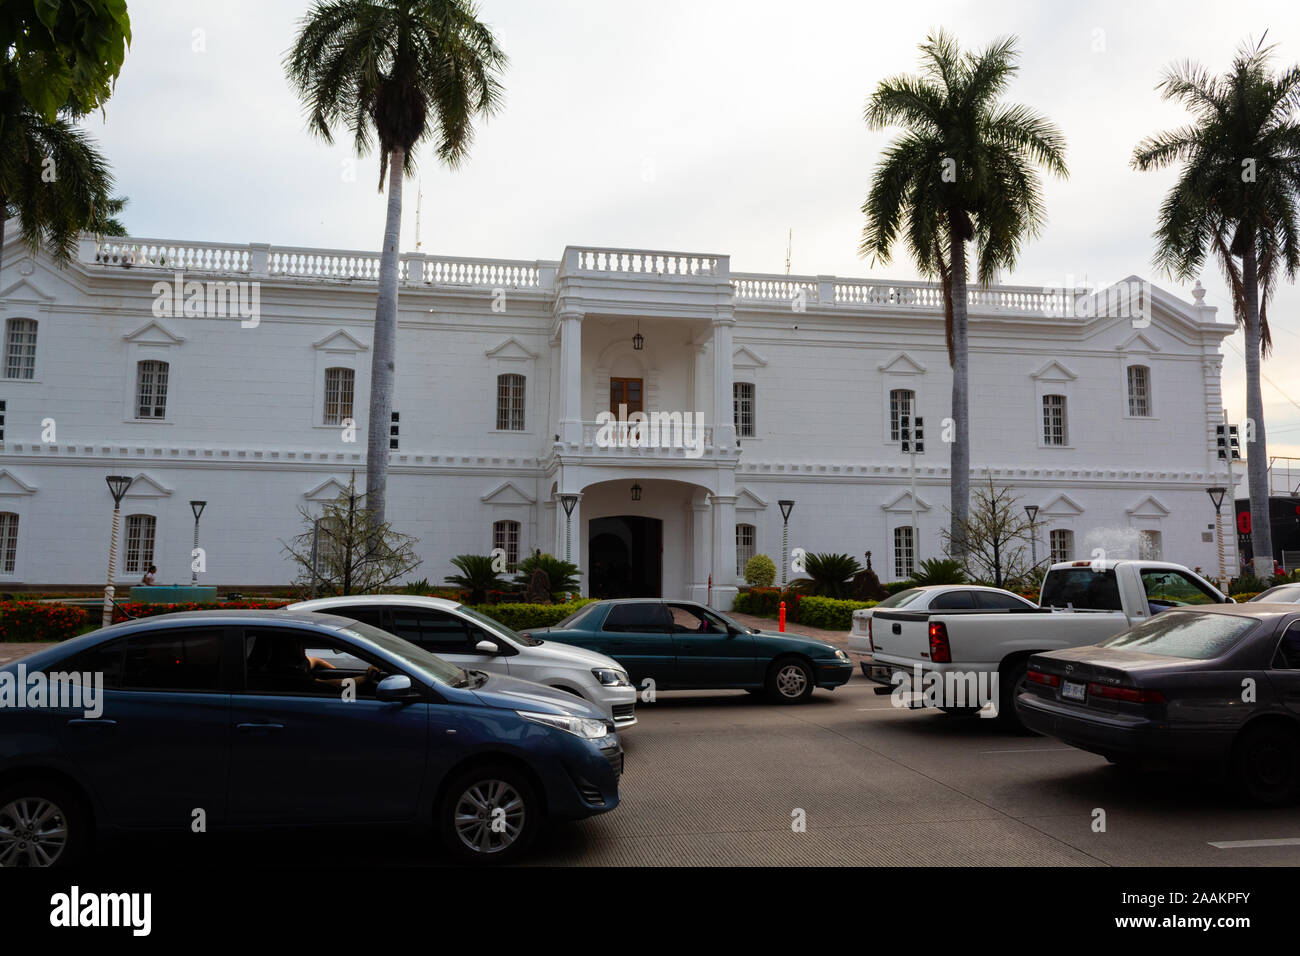 Culiacan, Sinaloa, Mexico - November 05 2019: Iconic building of the City Hall of the city of Culiacan, located in the center of the city, symbol of l Stock Photo